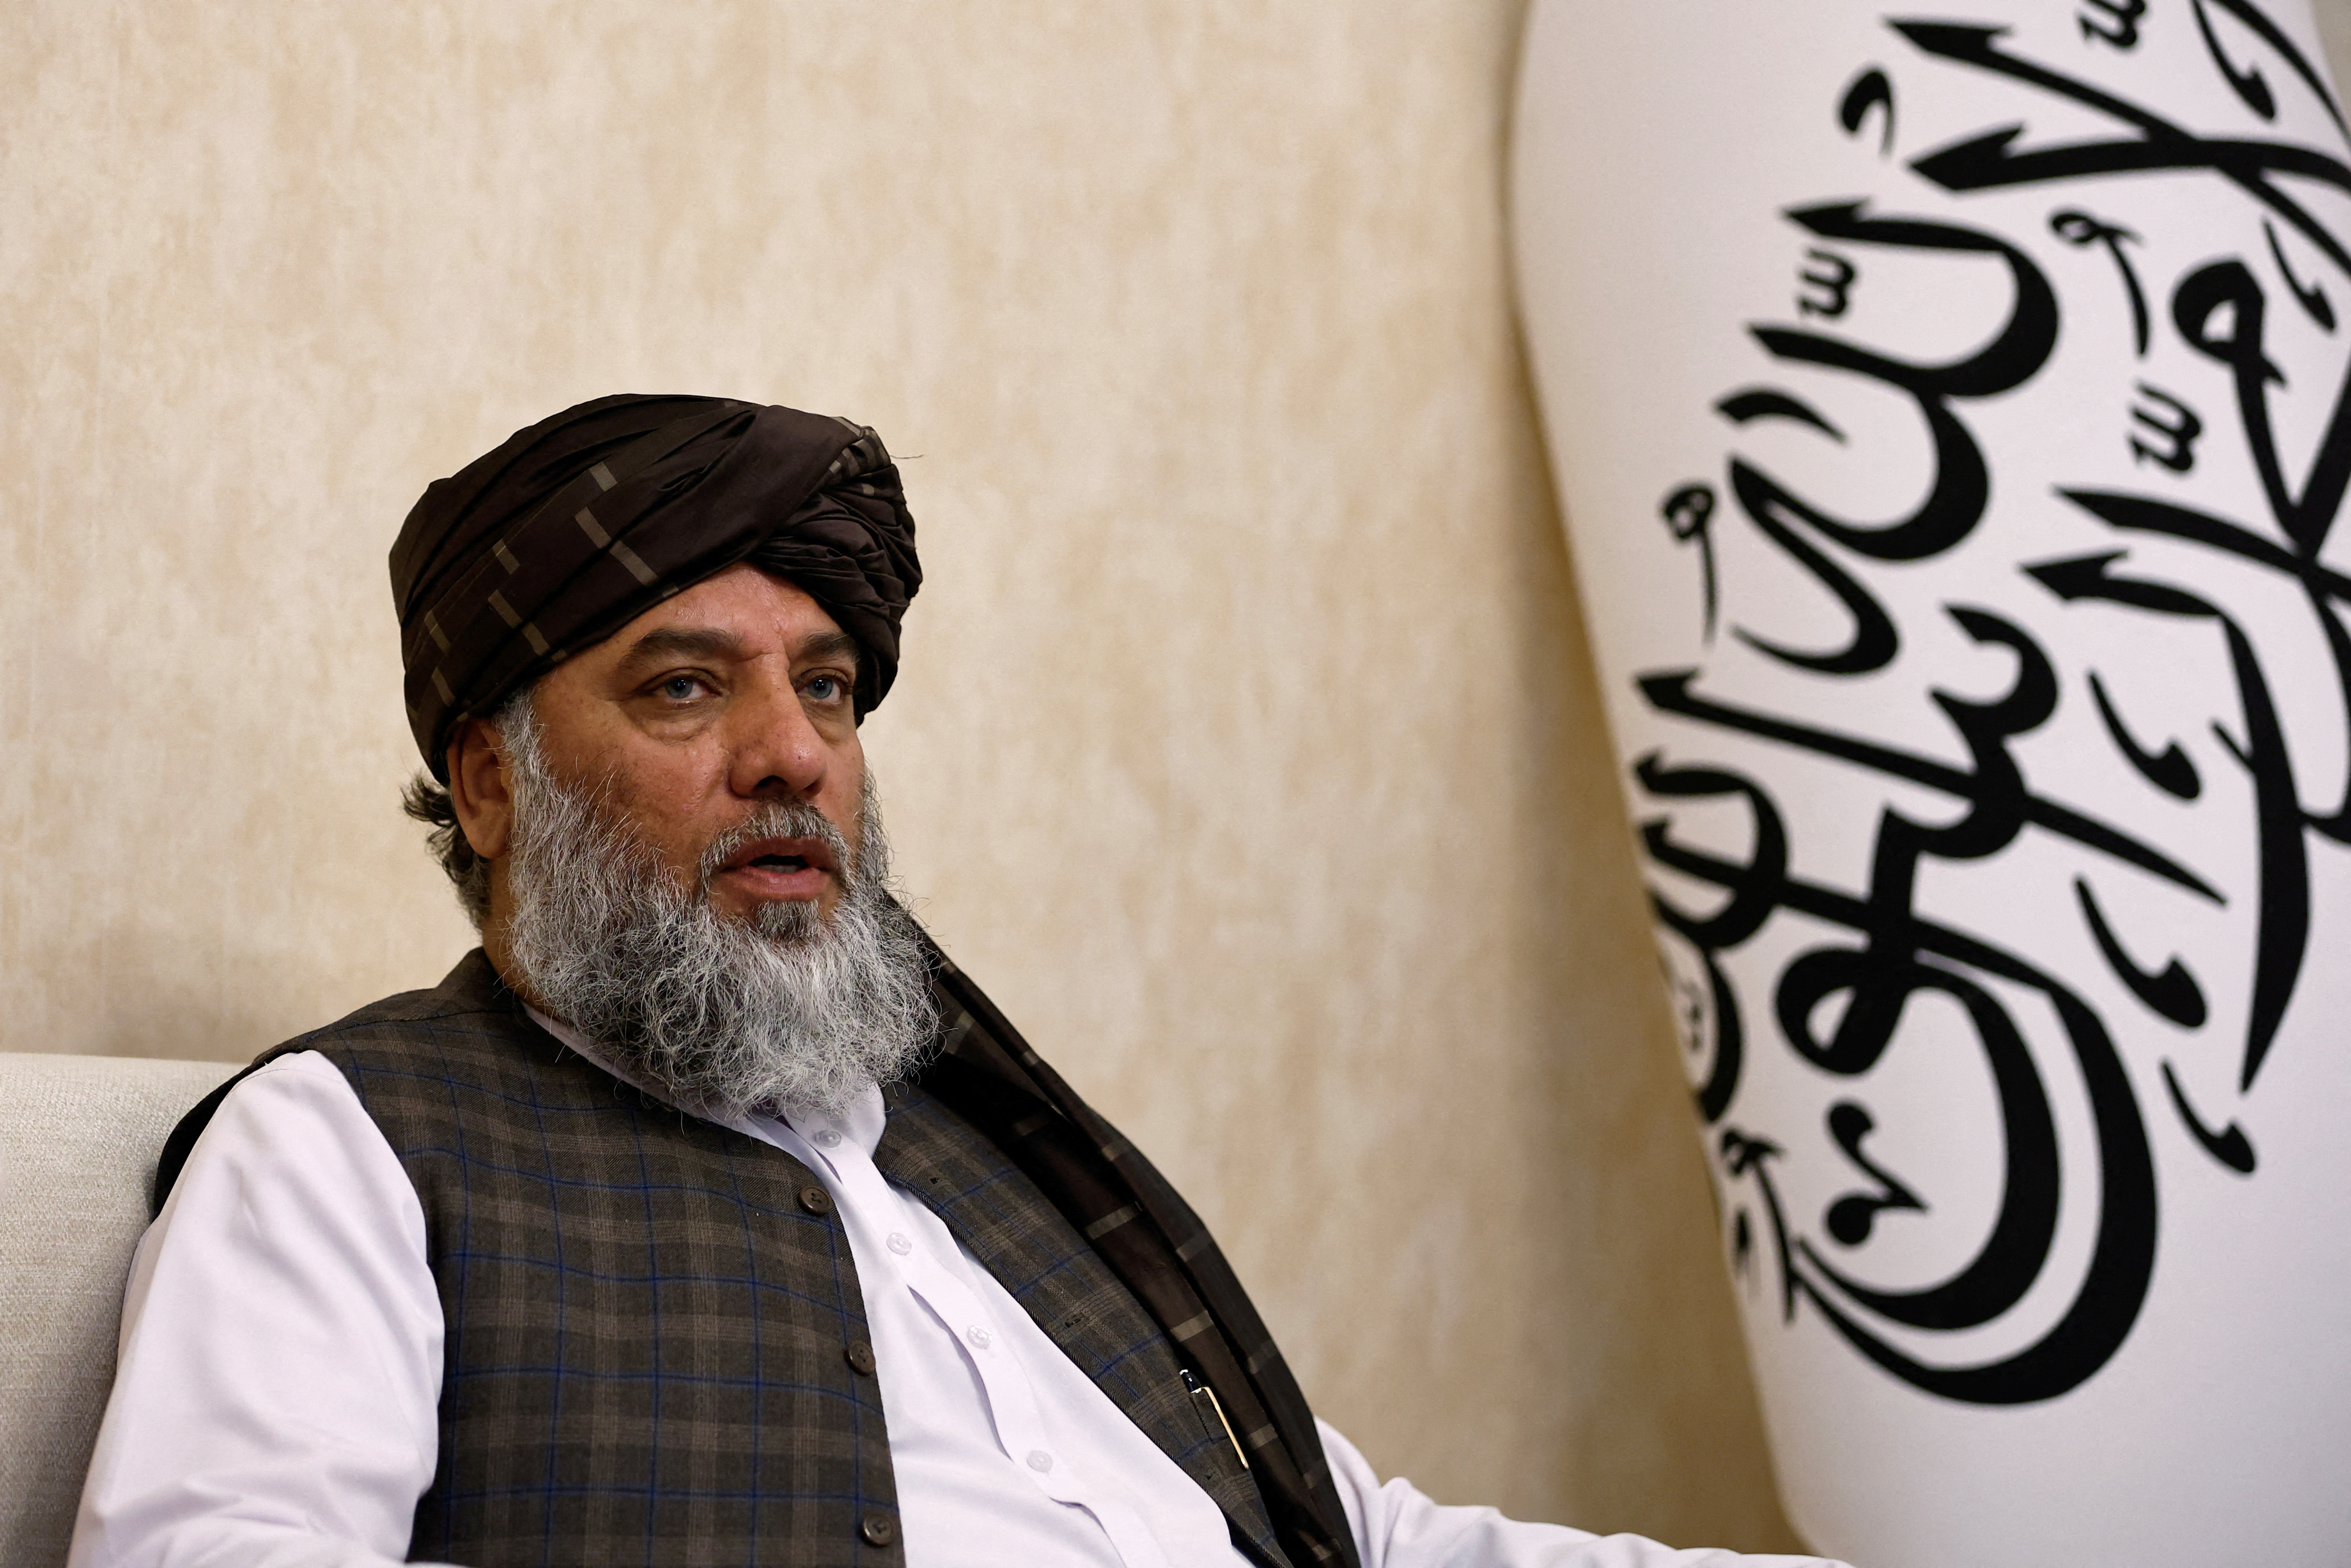 Taliban's acting commerce minister Haji Nooruddin Azizi speaks during an interview with Reuters, at the Embassy of Afghanistan in Beijing